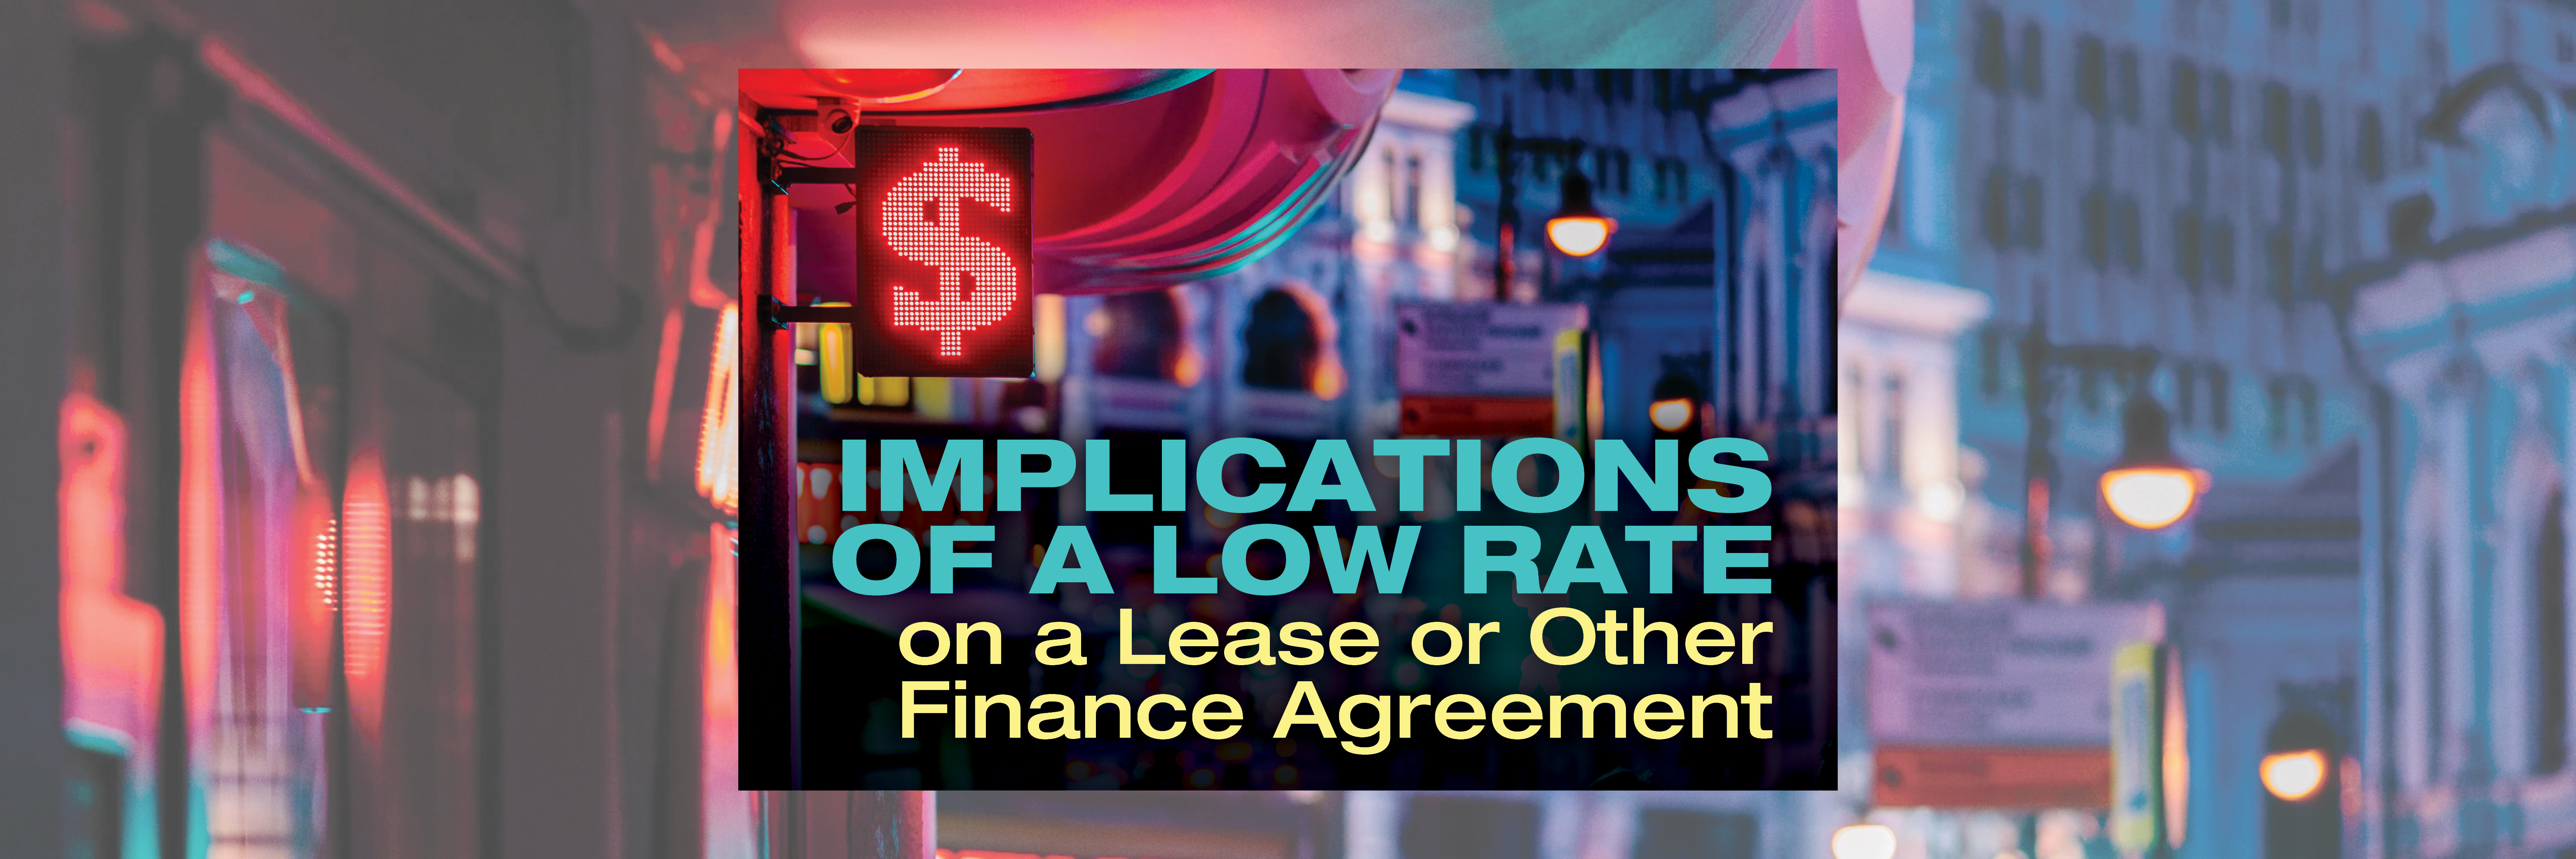 Implications of a Low Rate on a Lease or Other Finance Agreement